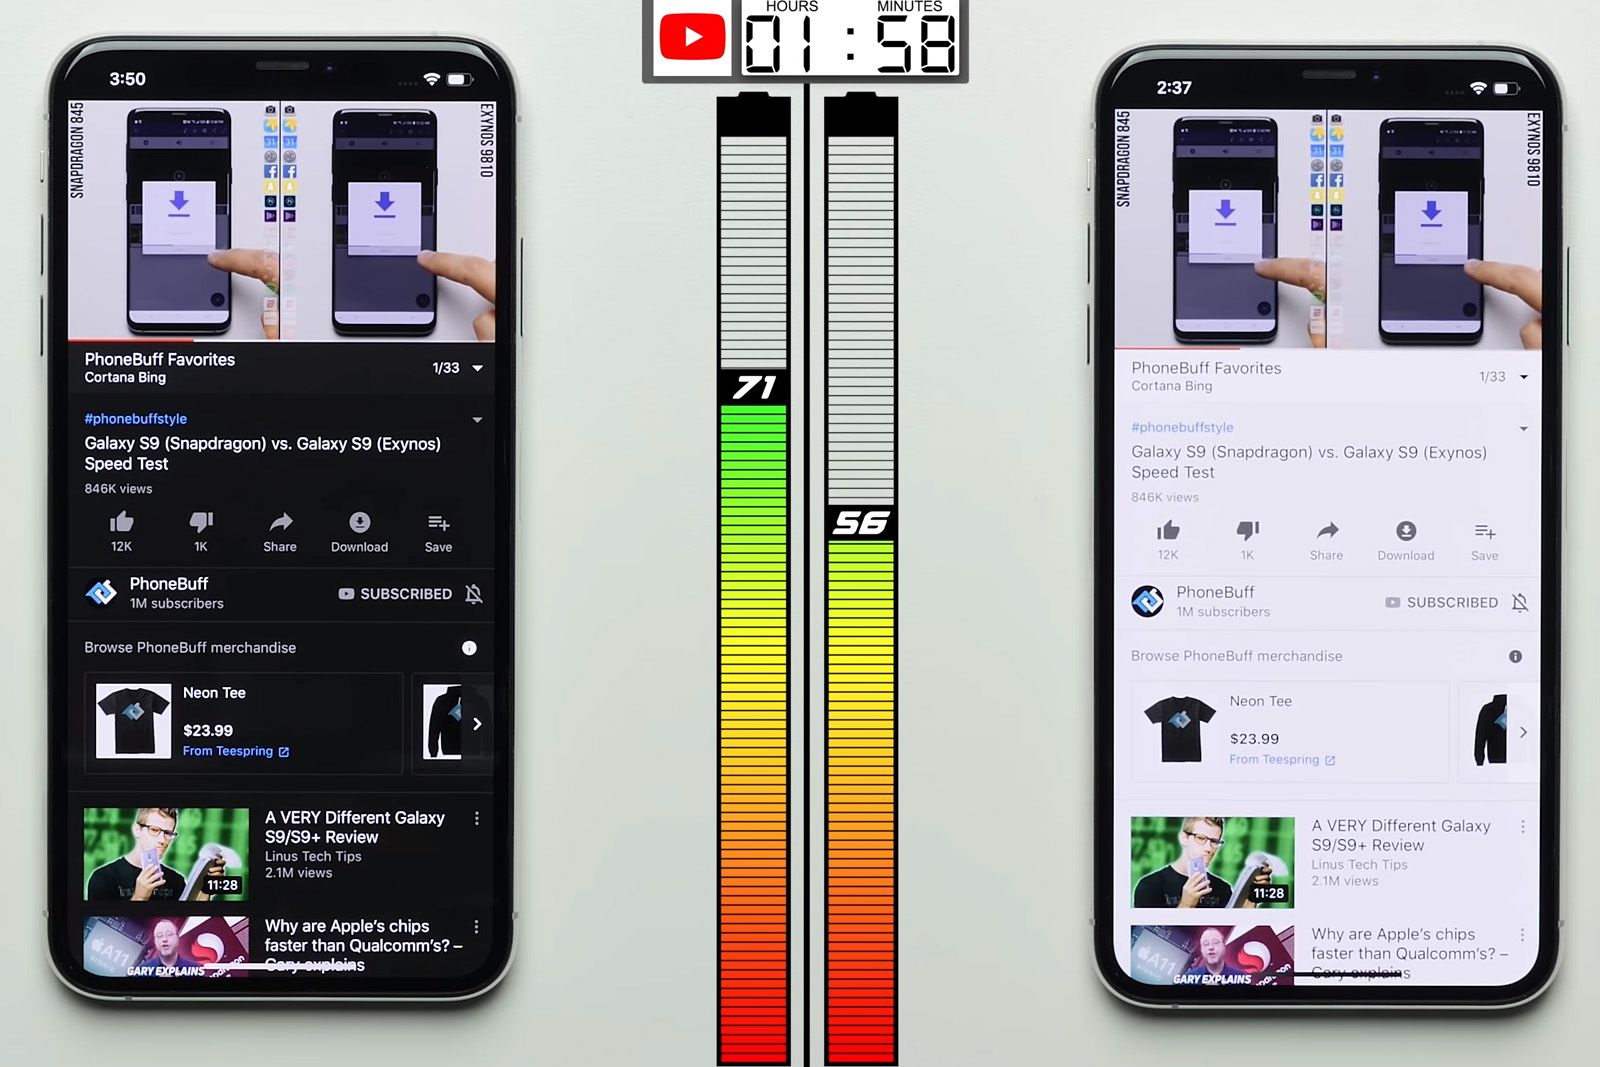 Confirmed Your iPhones dark mode will keep your battery going longer image 1